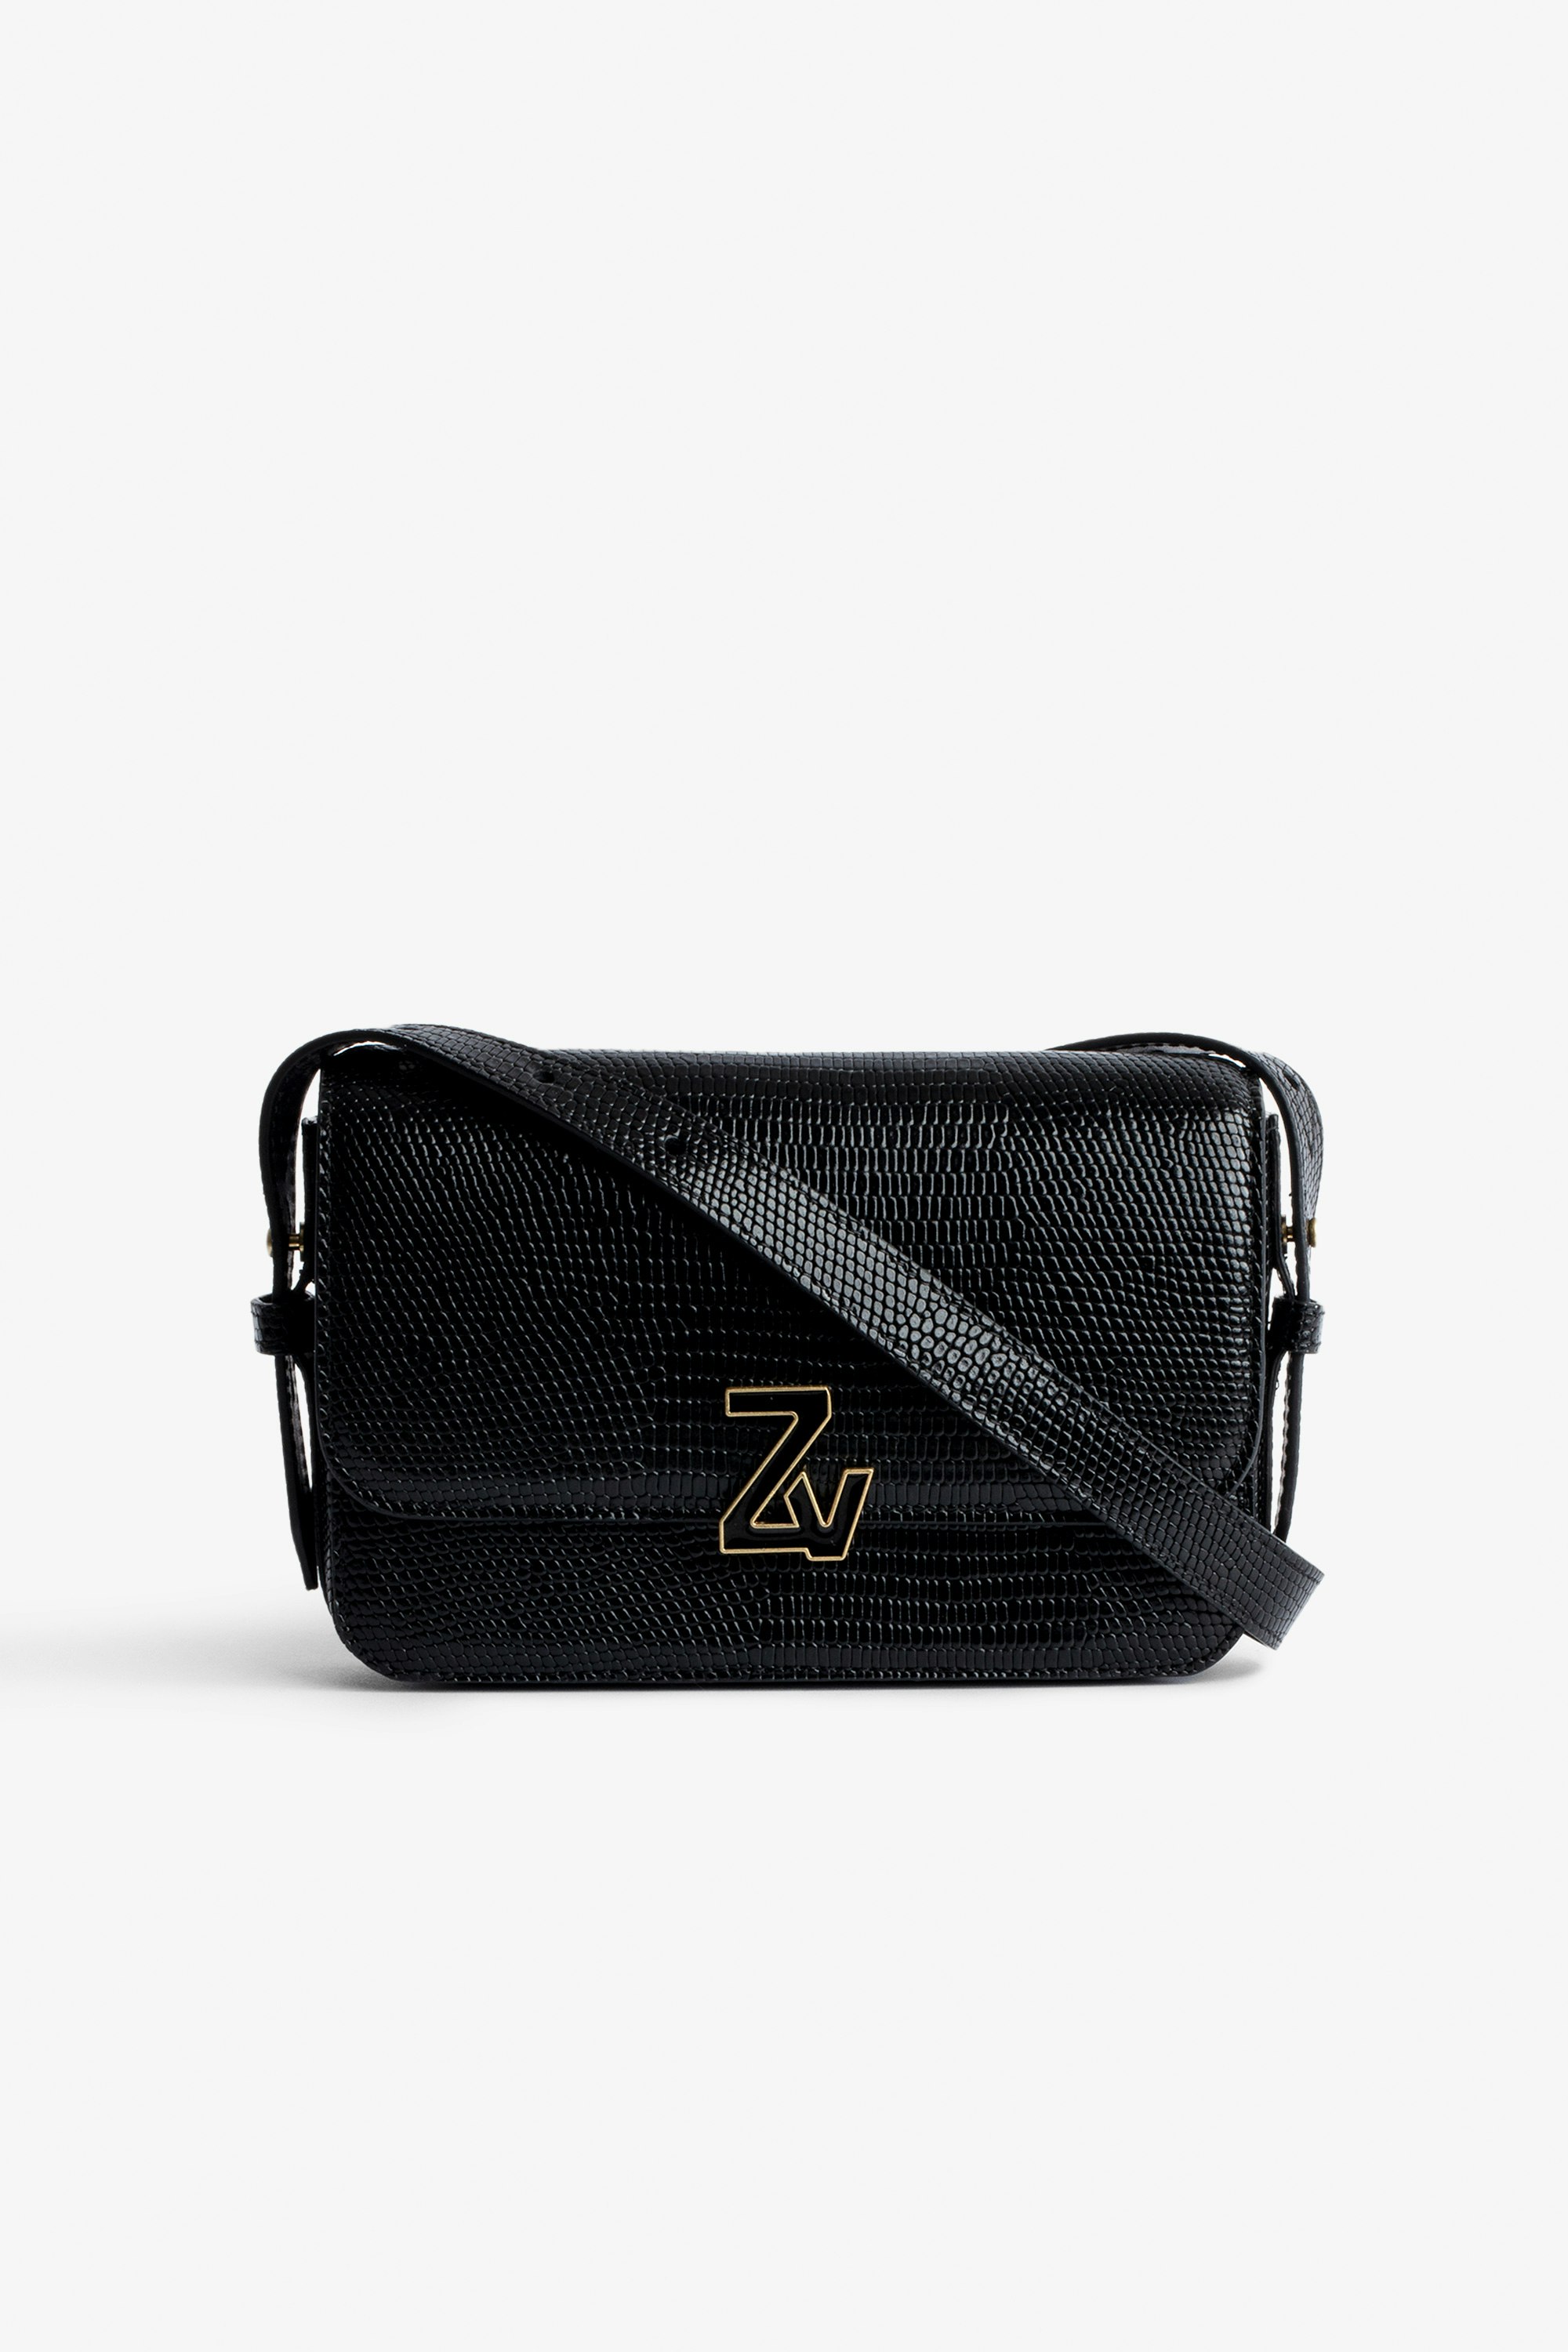 Le Mini ZV Initiale Bag - Women’s Le Mini ZV Initiale bag in black iguana-effect embossed leather with flap, clasp, and shoulder strap